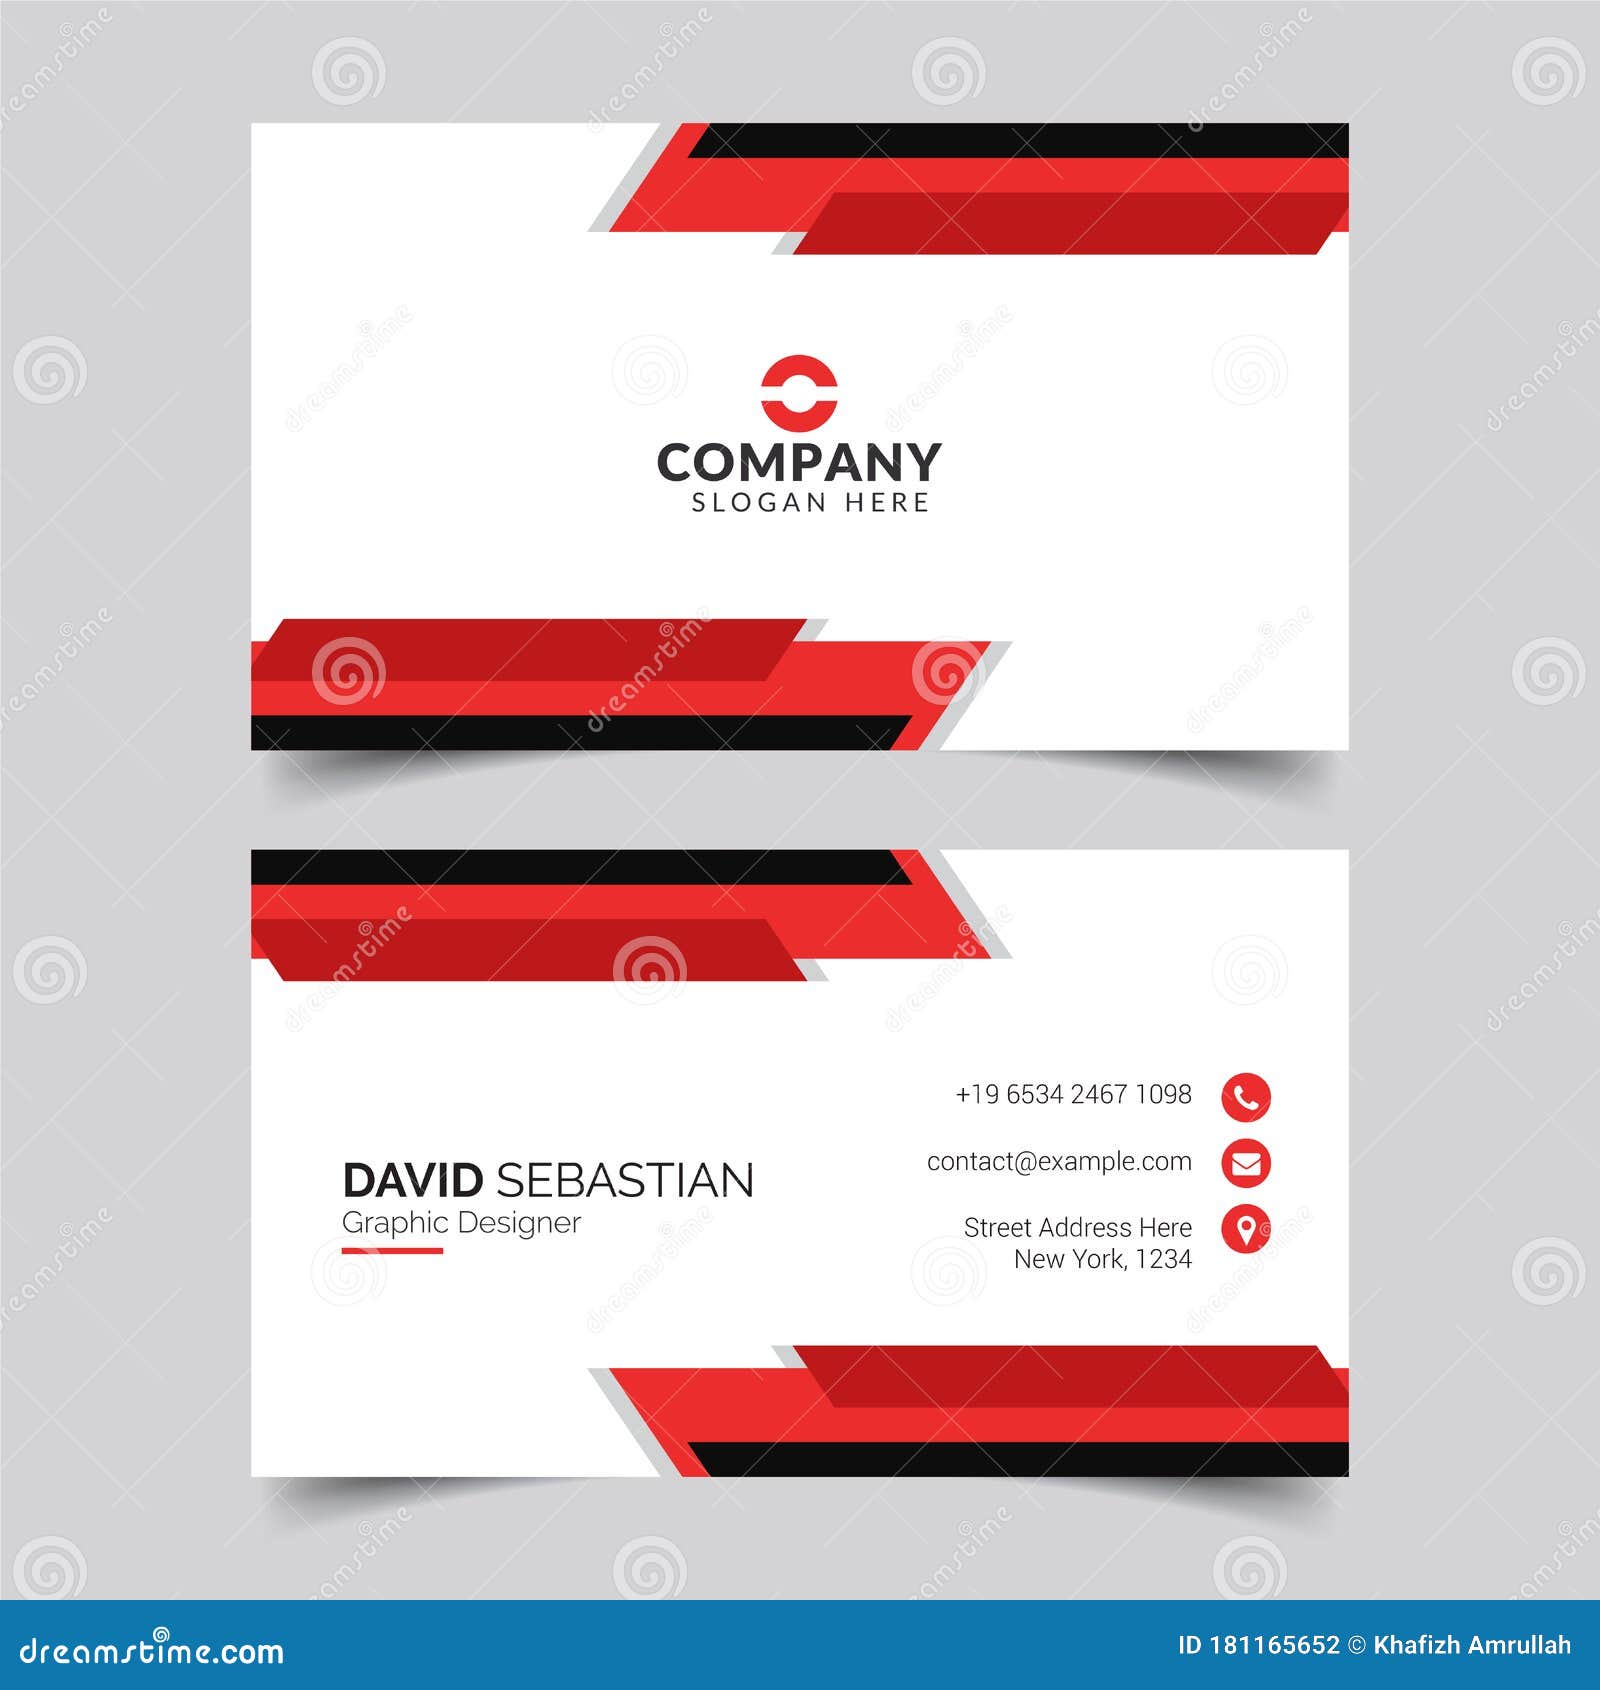 Modern and Clean Business Card Design Template. Minimal Corporate Regarding Office Max Business Card Template